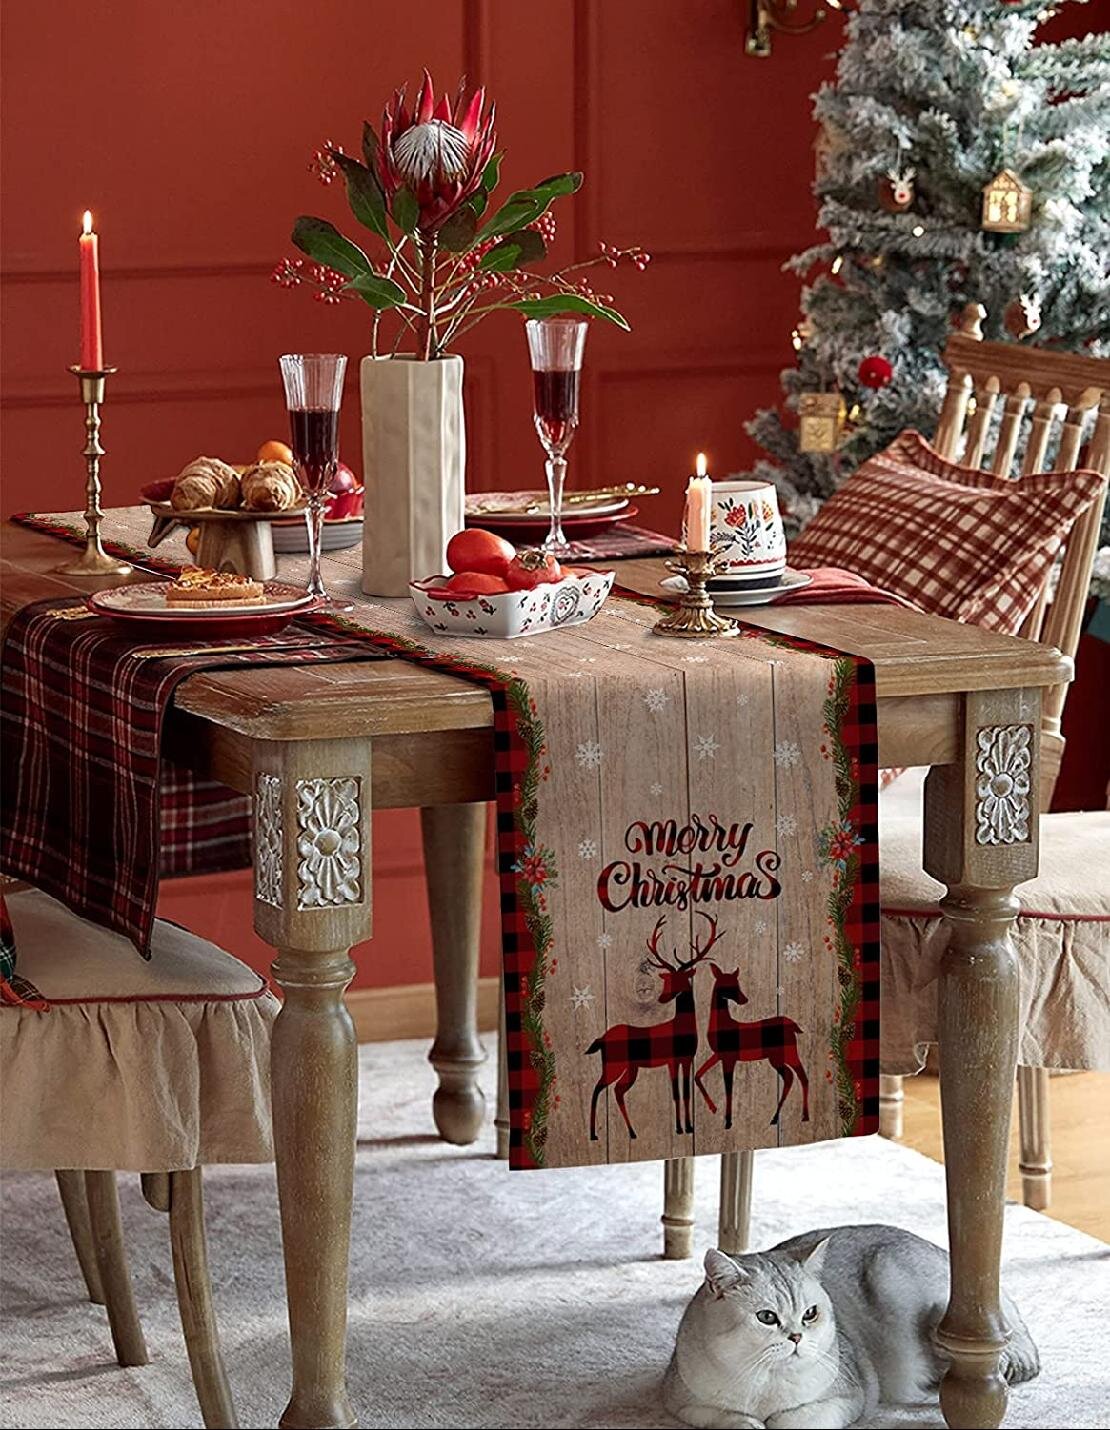 Seliem Christmas Reindeer Pine Tree Table Runner, Merry Xmas Snowflakes Table Scarf Home Kitchen Red Decor Sign Winter Holiday Farmhouse Rustic Burlap Dining Decorations Party Supplies 13 X 72 Inch